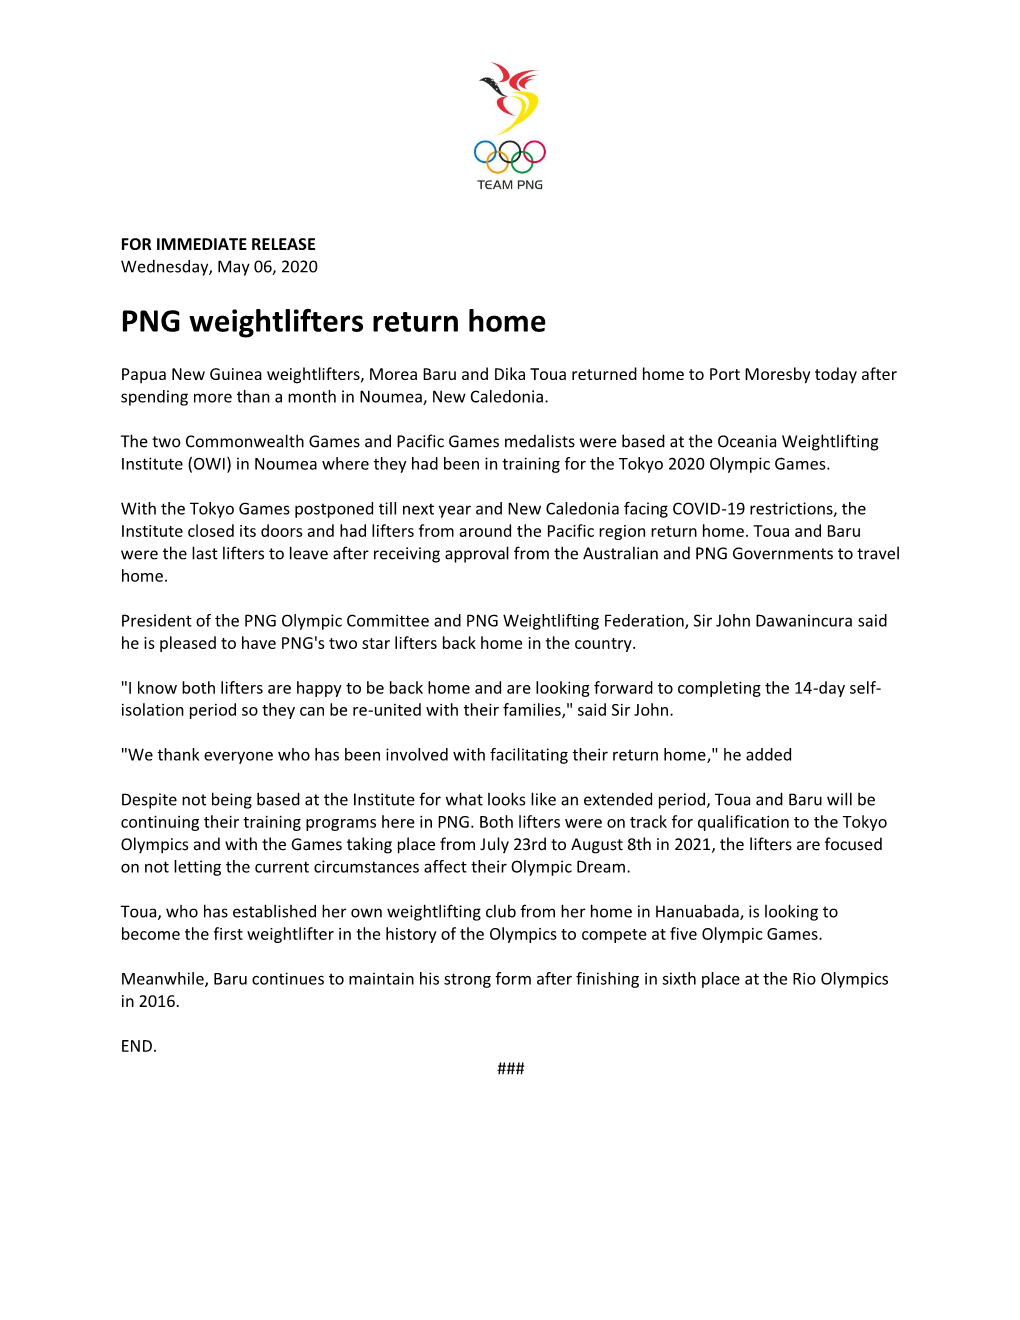 PNG Weightlifters Return Home